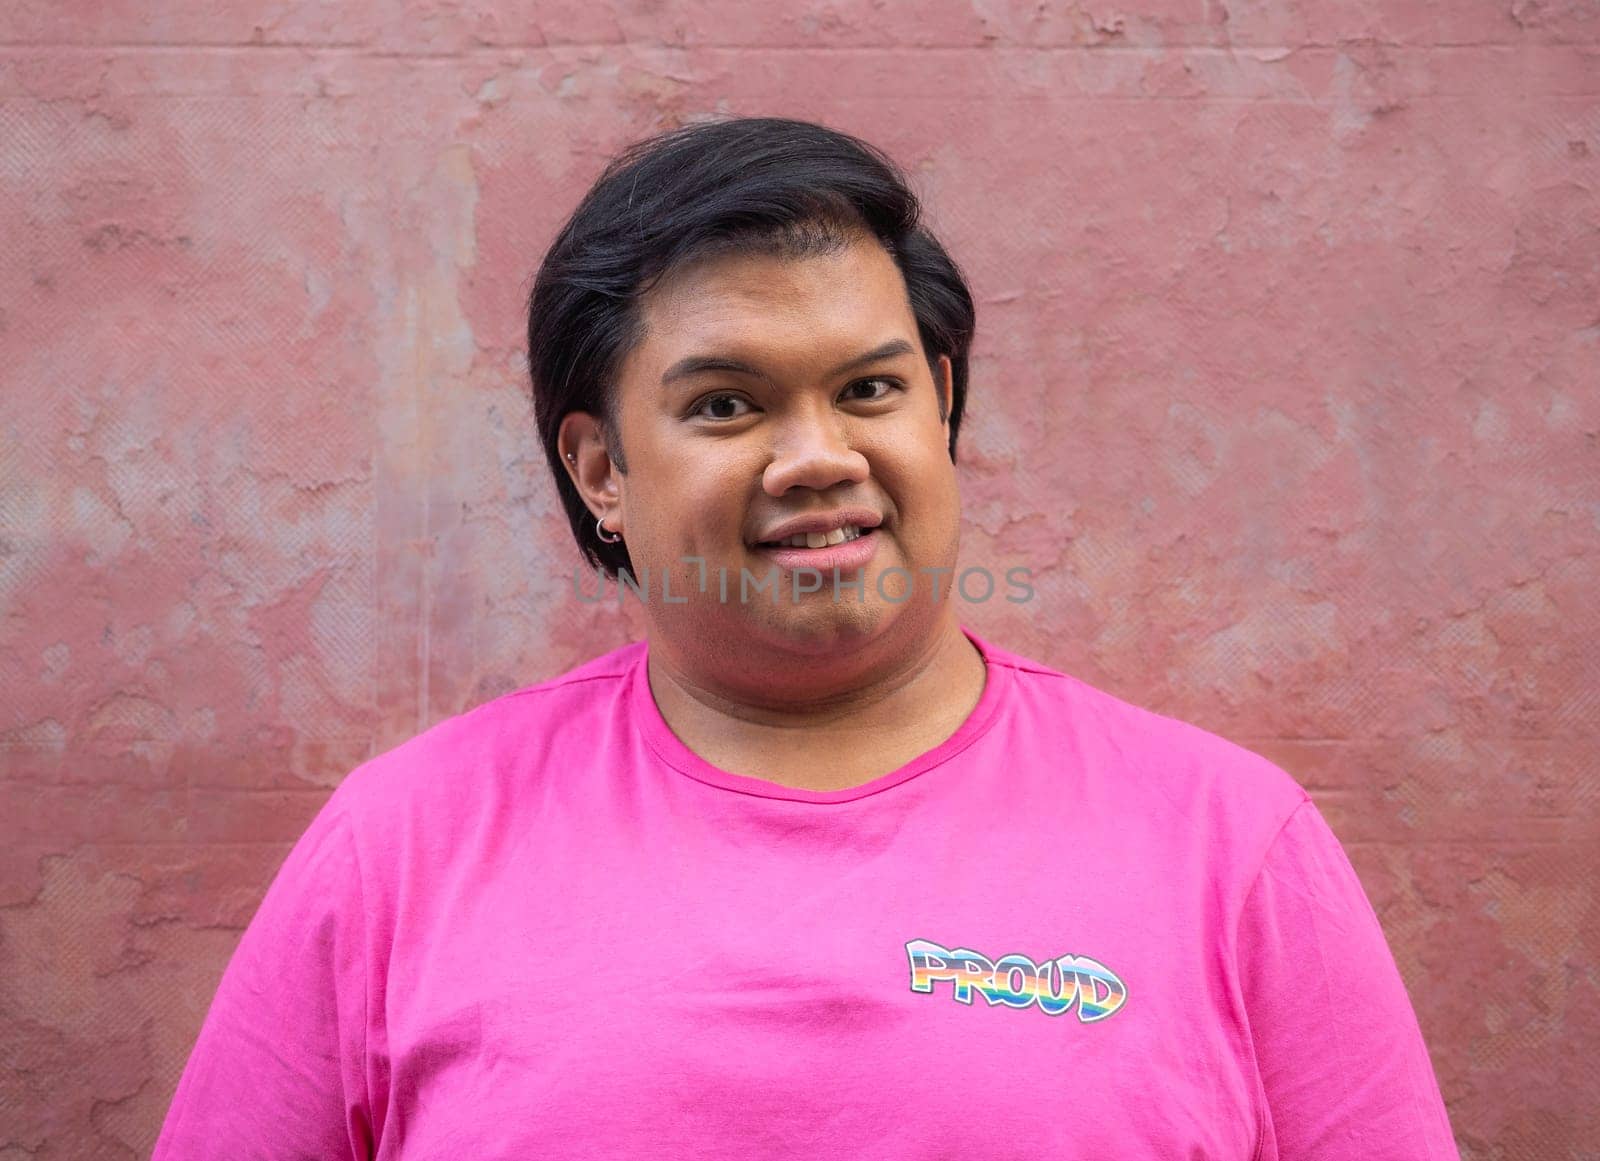 Portrait of asian man smiling with a shirt that he is proud to support homosexual community.